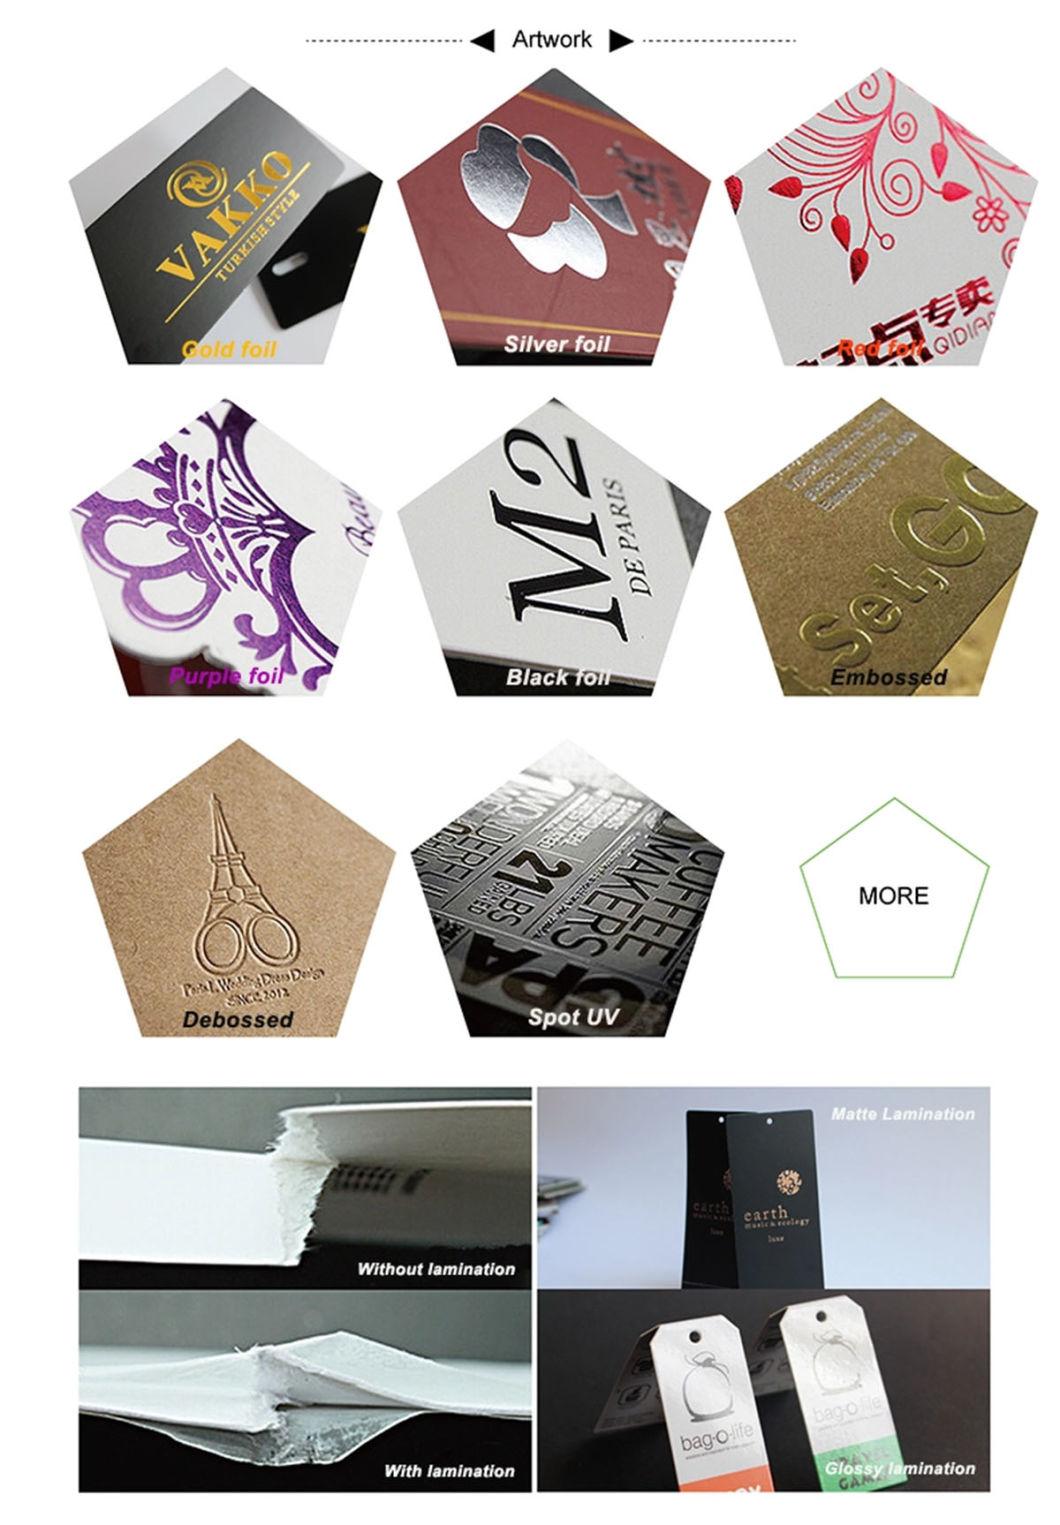 Well-Designed and Interesting Swing Cards for Children′s Bag